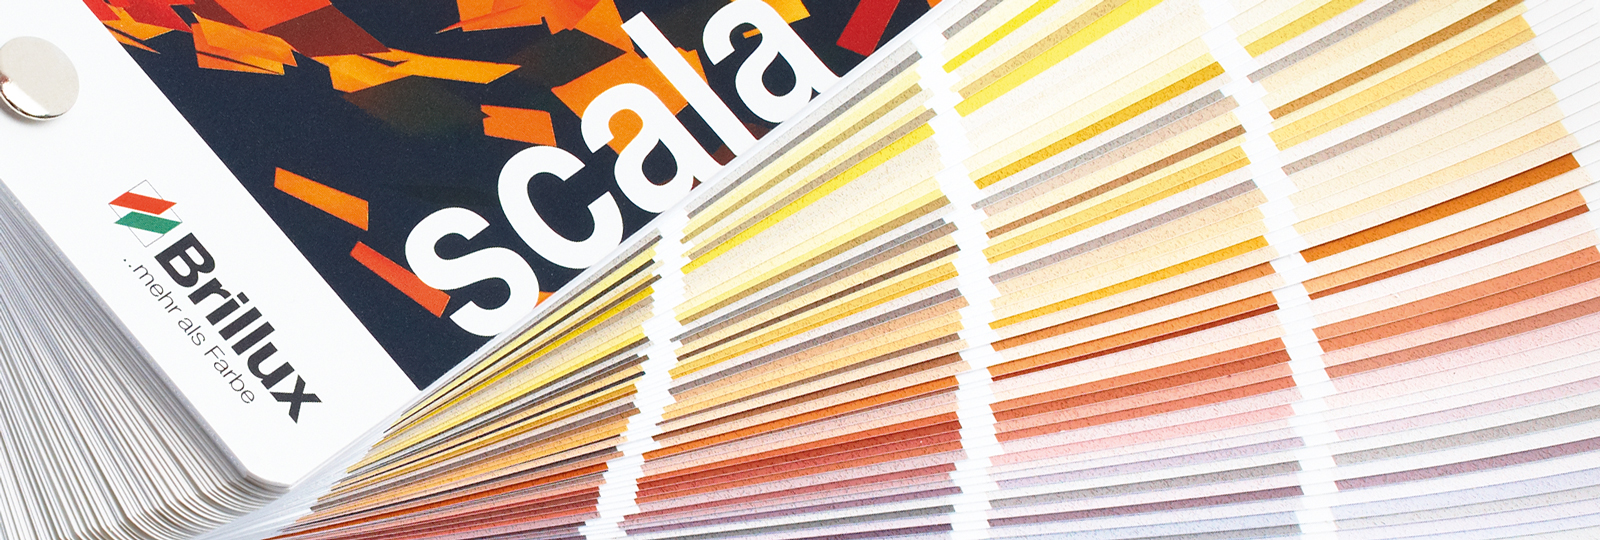 Scala color planning system